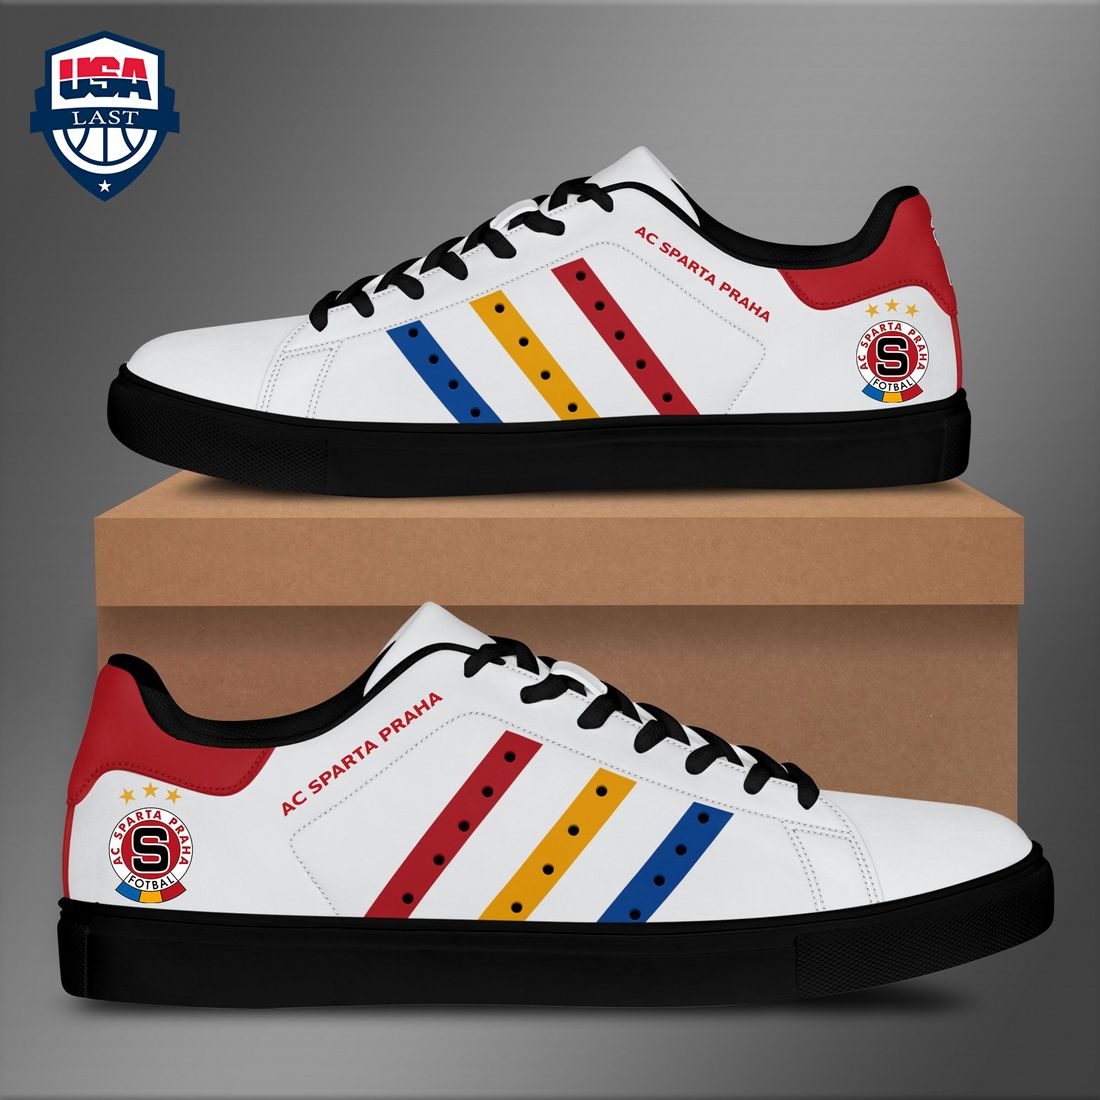 ac-sparta-praha-red-yellow-blue-stripes-style-2-stan-smith-low-top-shoes-1-vVn0F.jpg